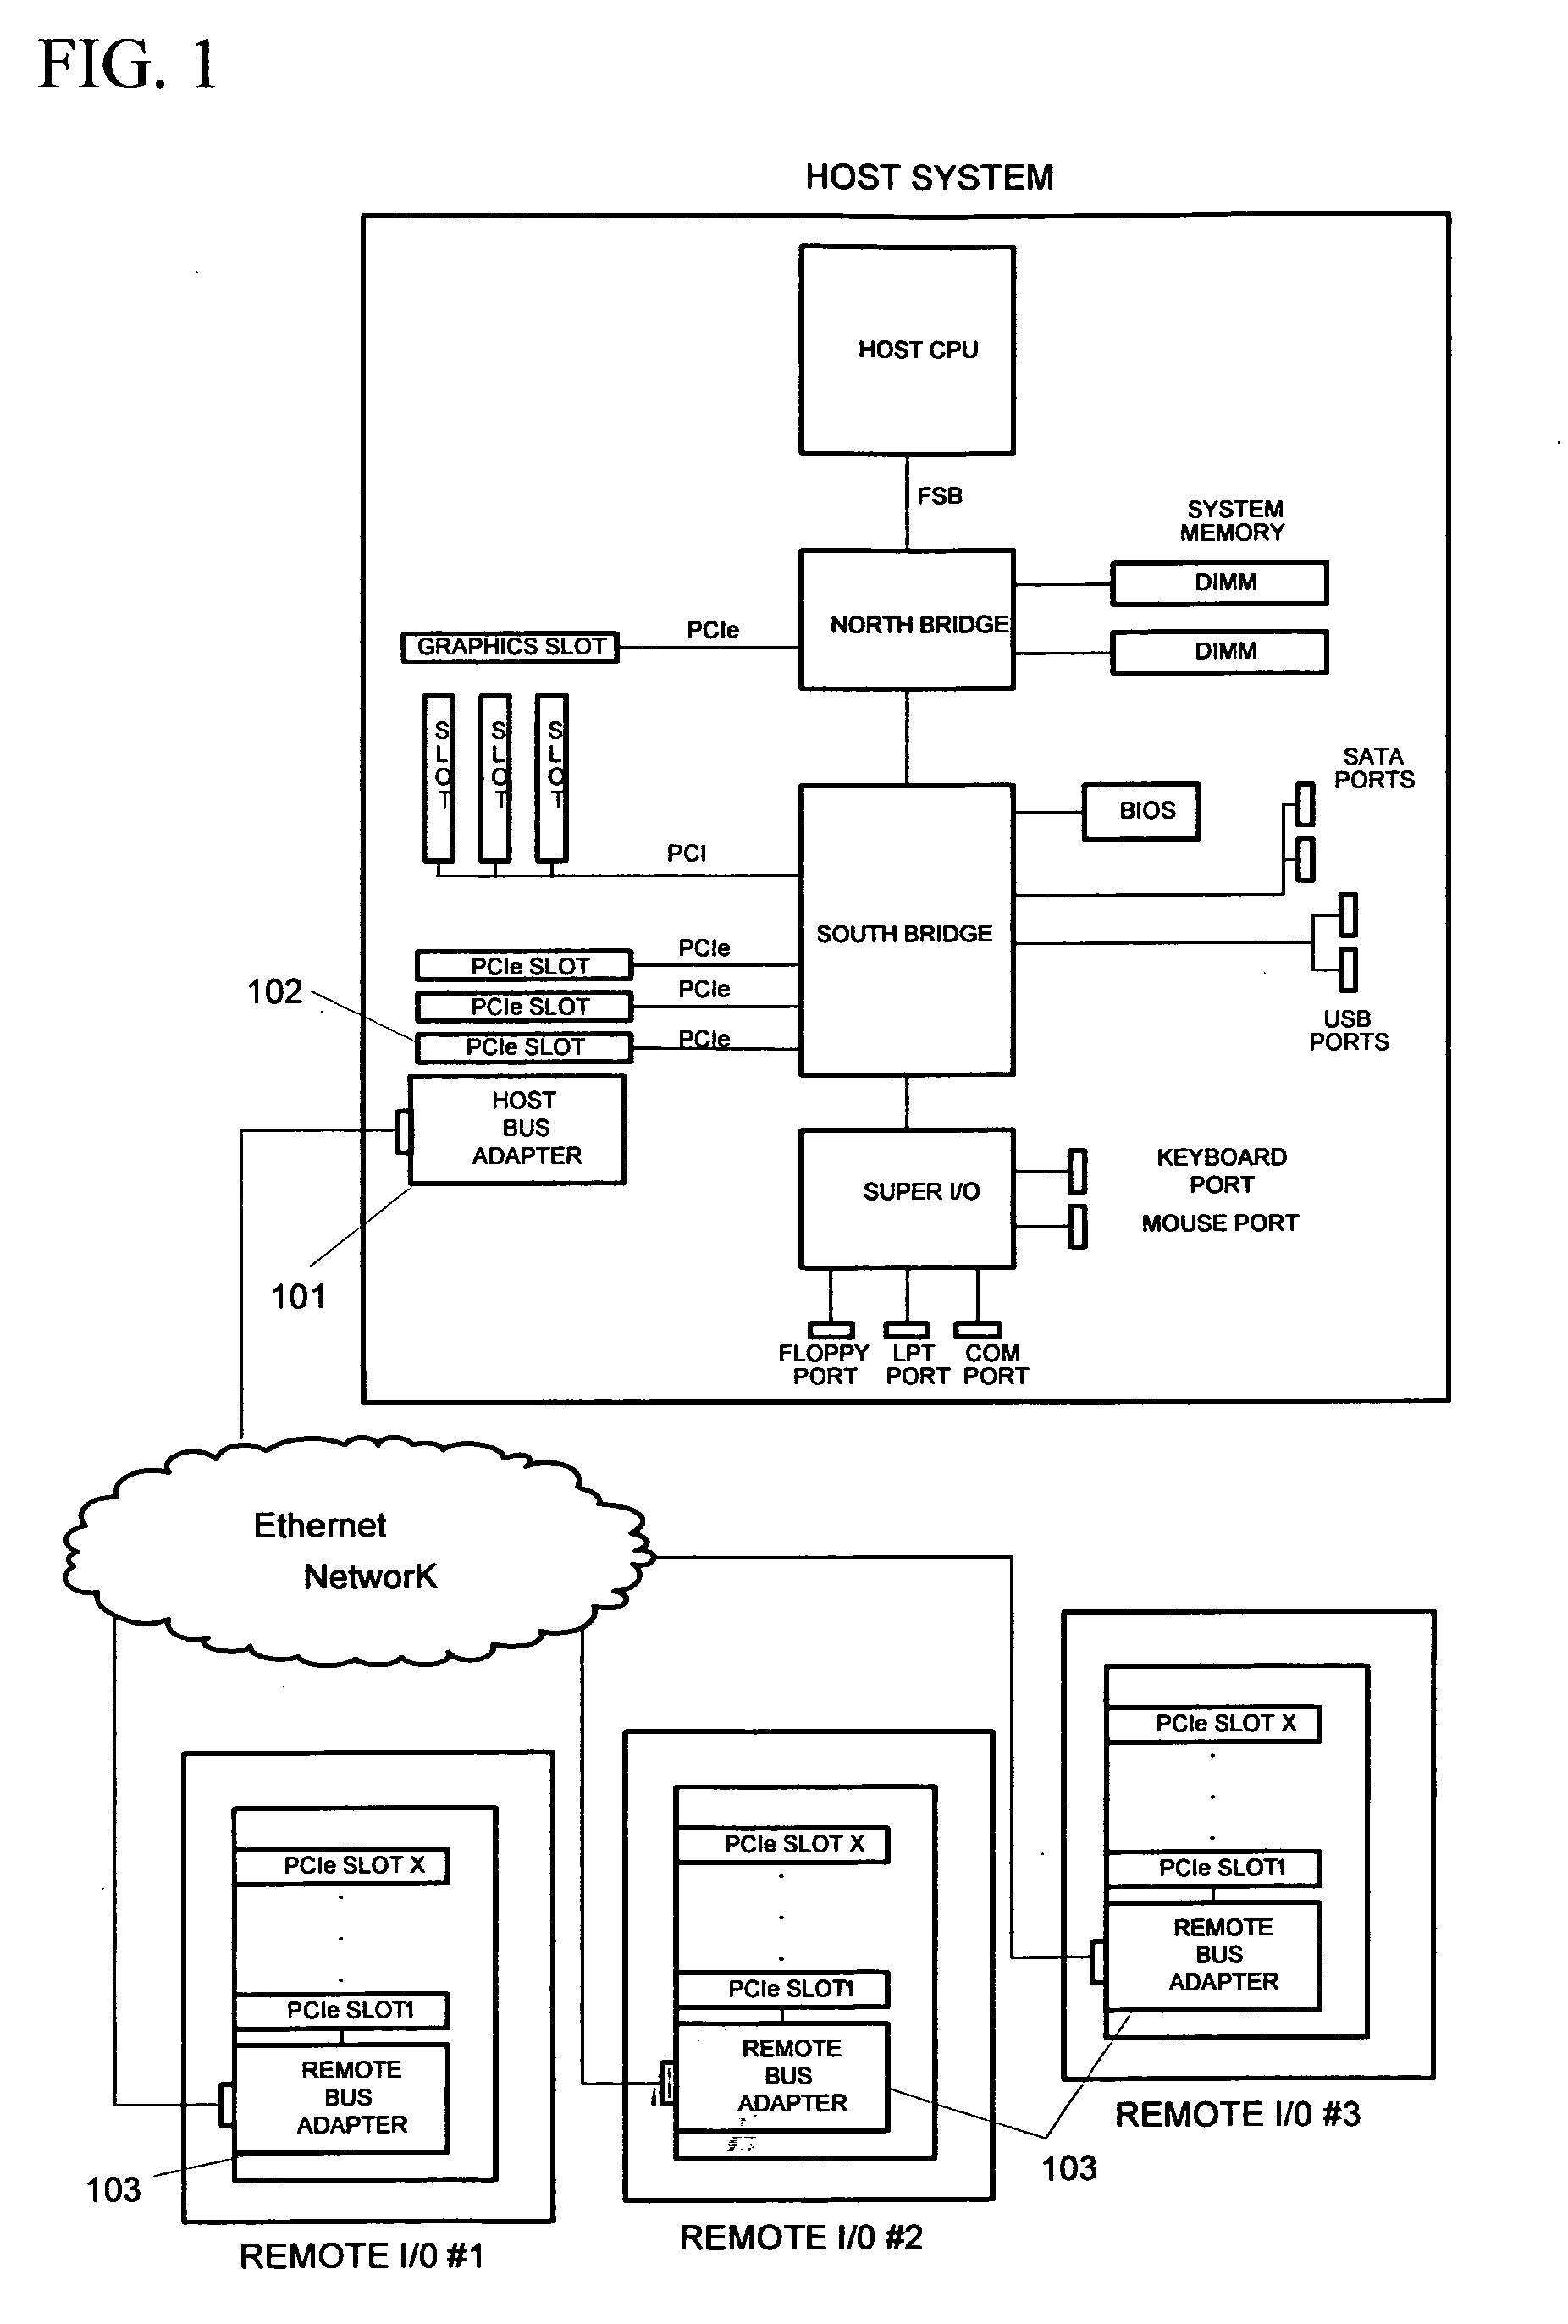 Host bus adapter with network protocol auto-detection and selection capability